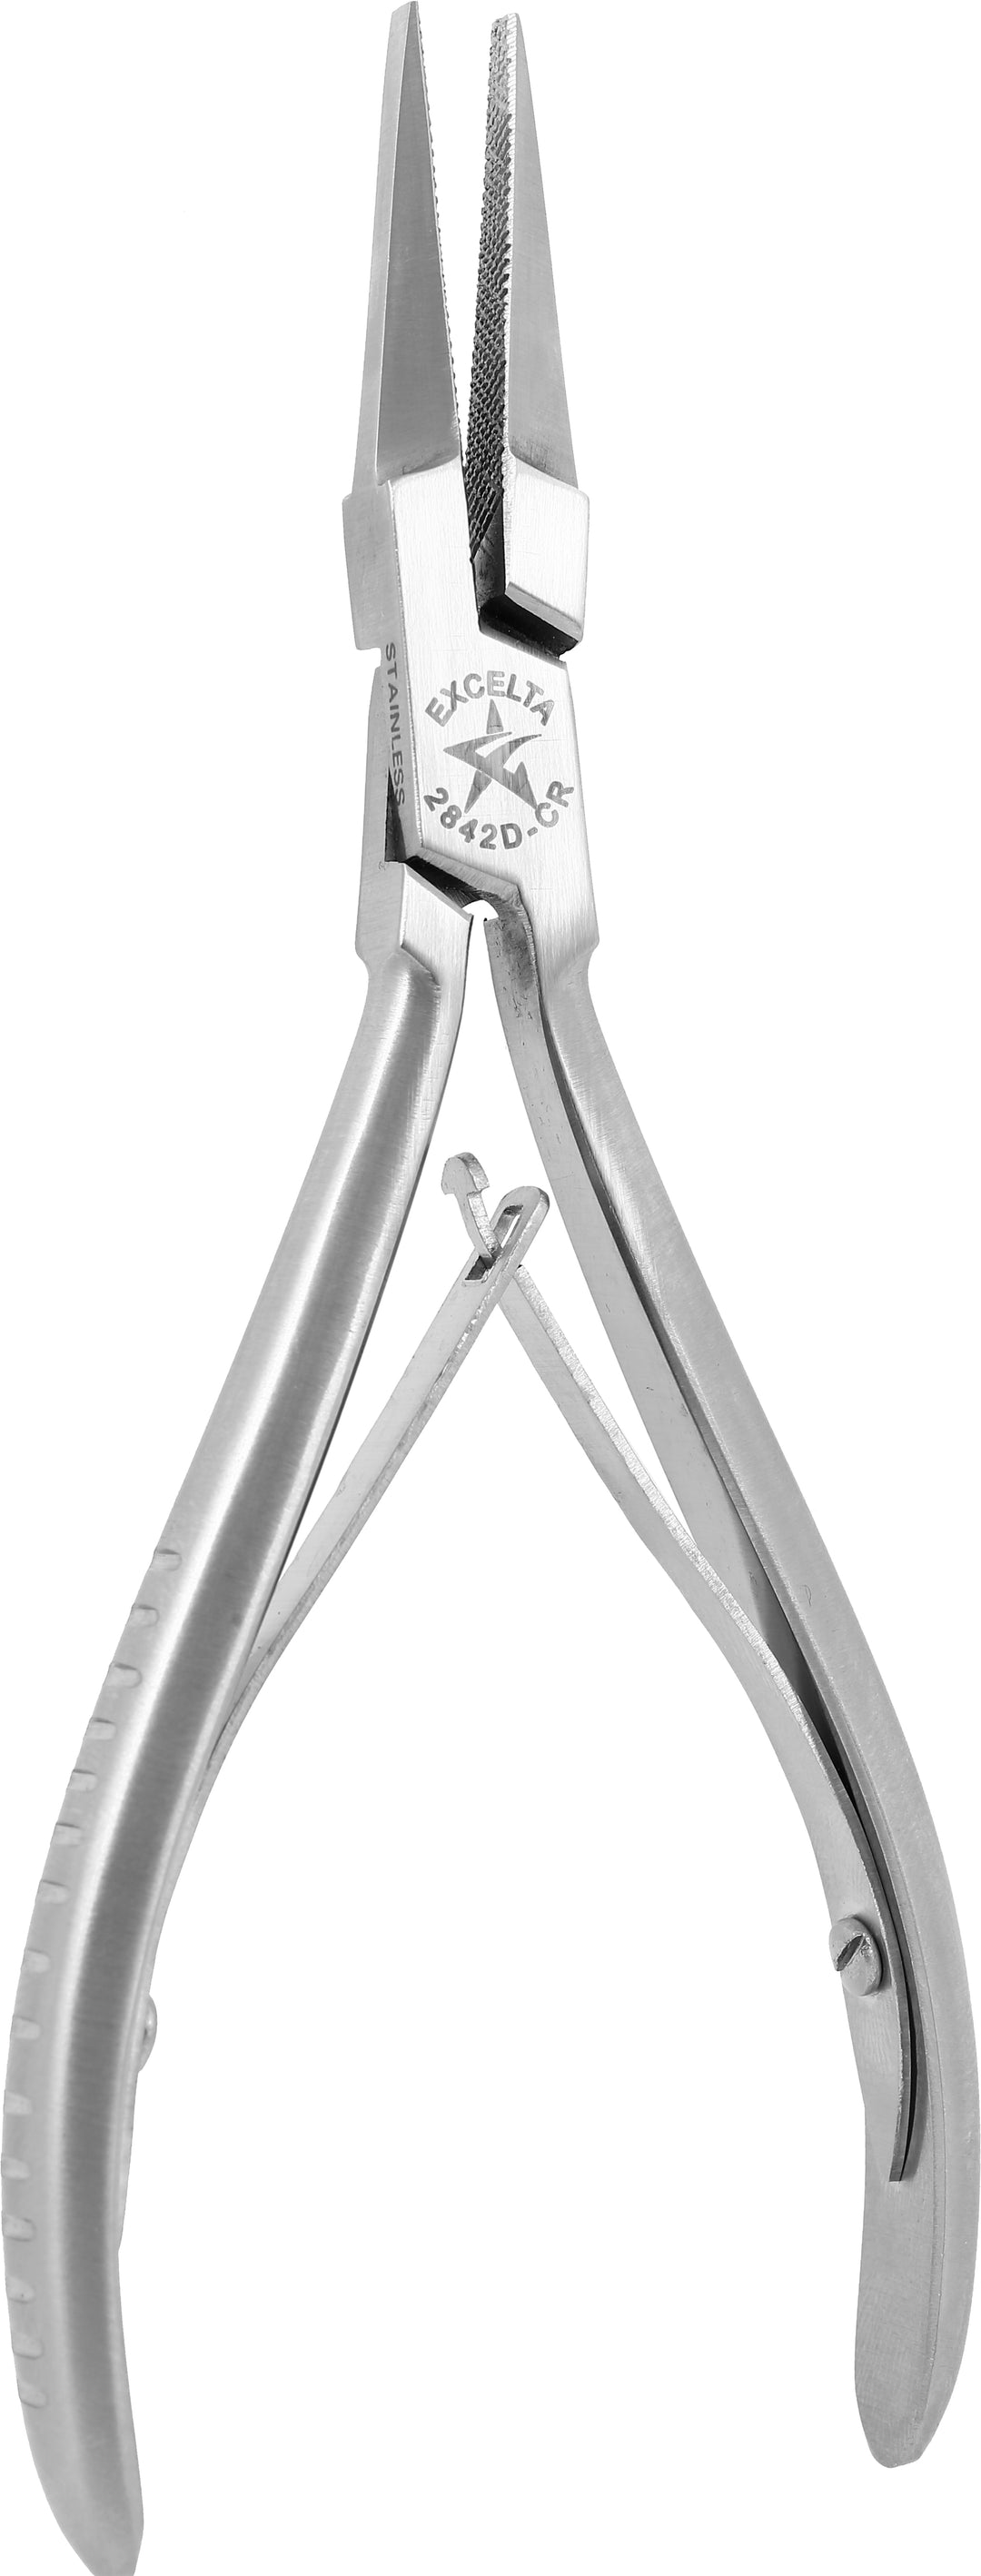 Excelta 2842D-CR Pliers - 2 Star Medium Flat .025" X .060" Nose - SS - Cleanroom Safe - Jaws